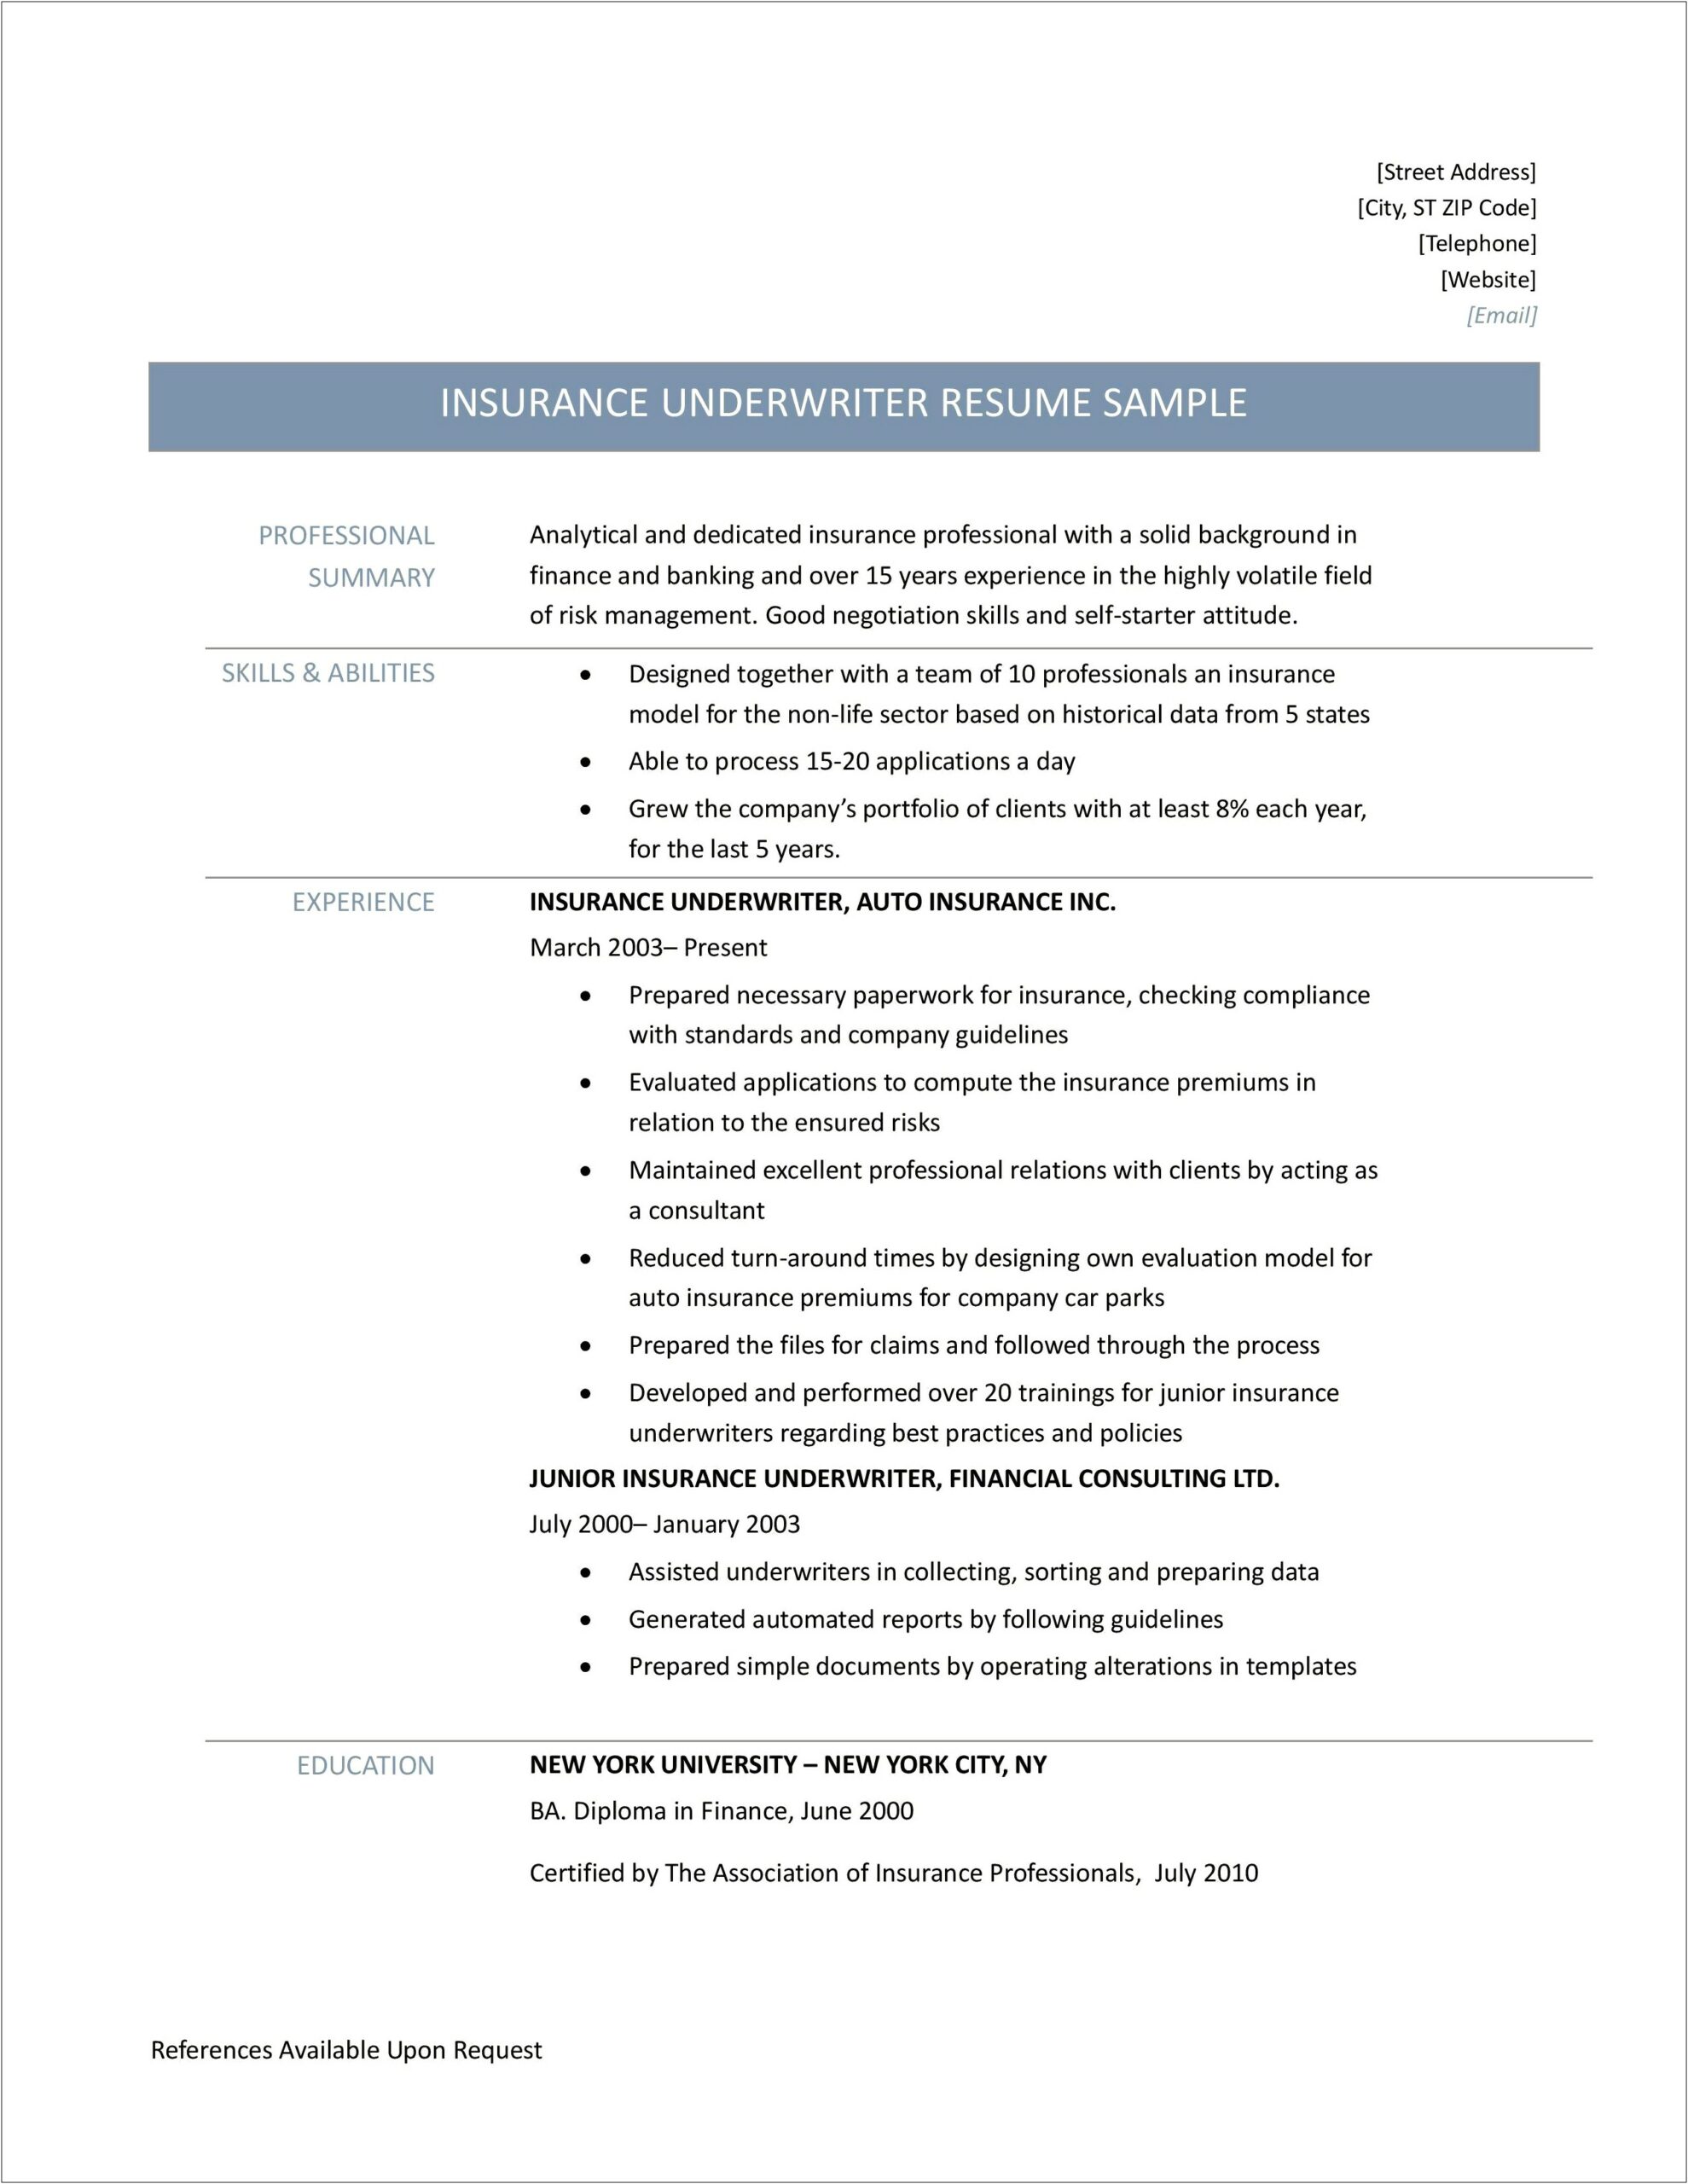 Resume Examples For Insurance Professionals